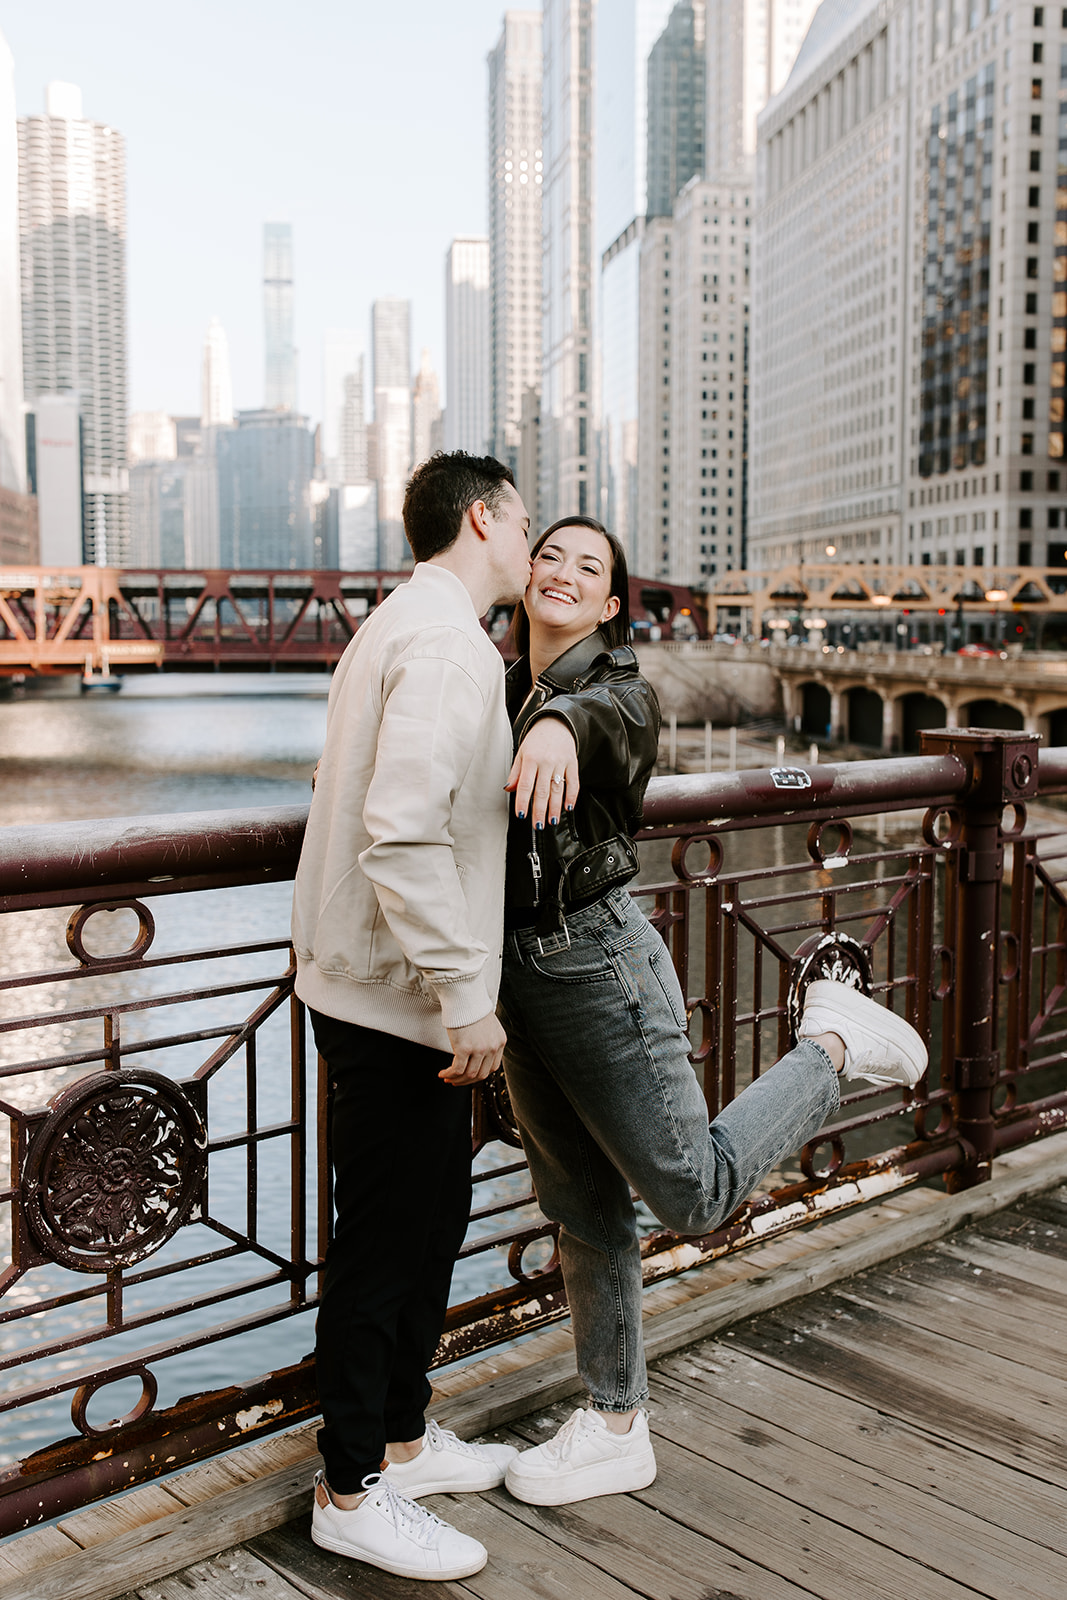 beautiful couple share a romantic pose with Chicago in the background